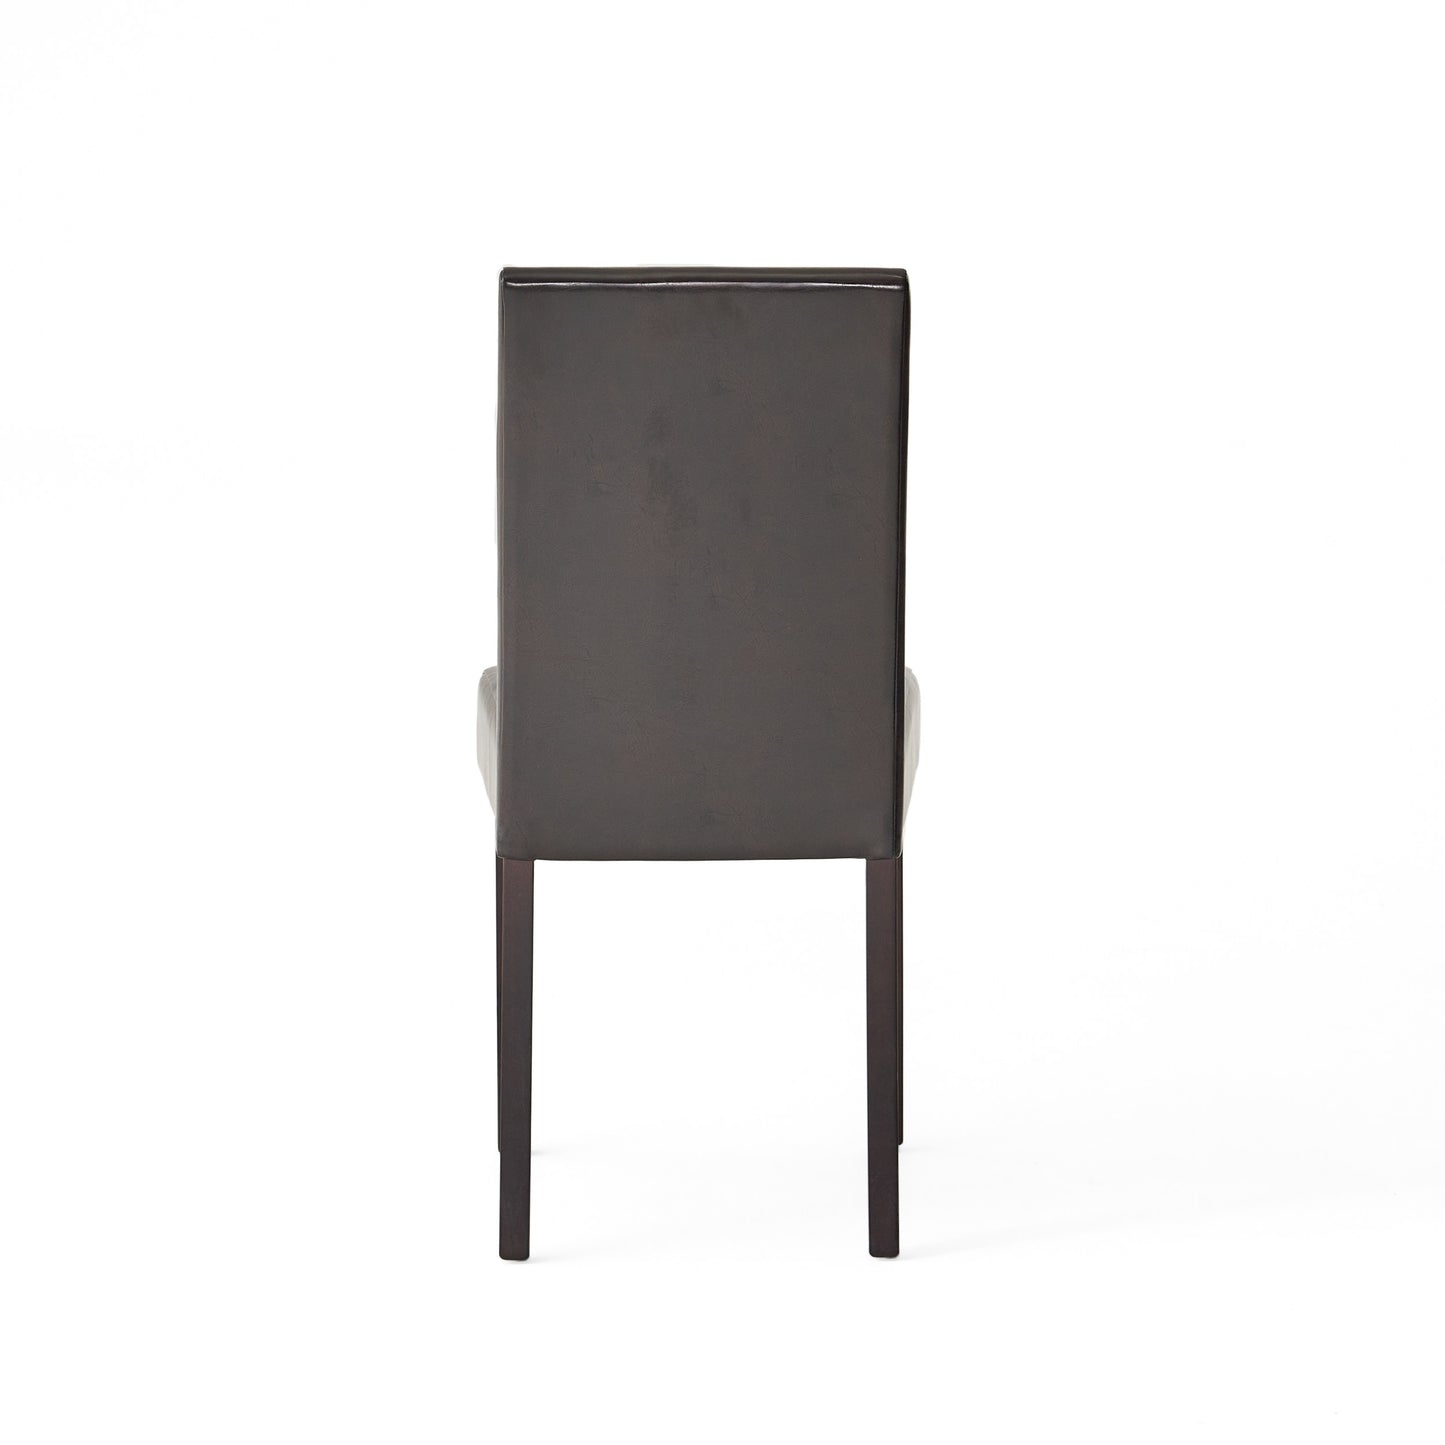 Esteban Brown Leather Parson Dining Chairs (Set of 2)